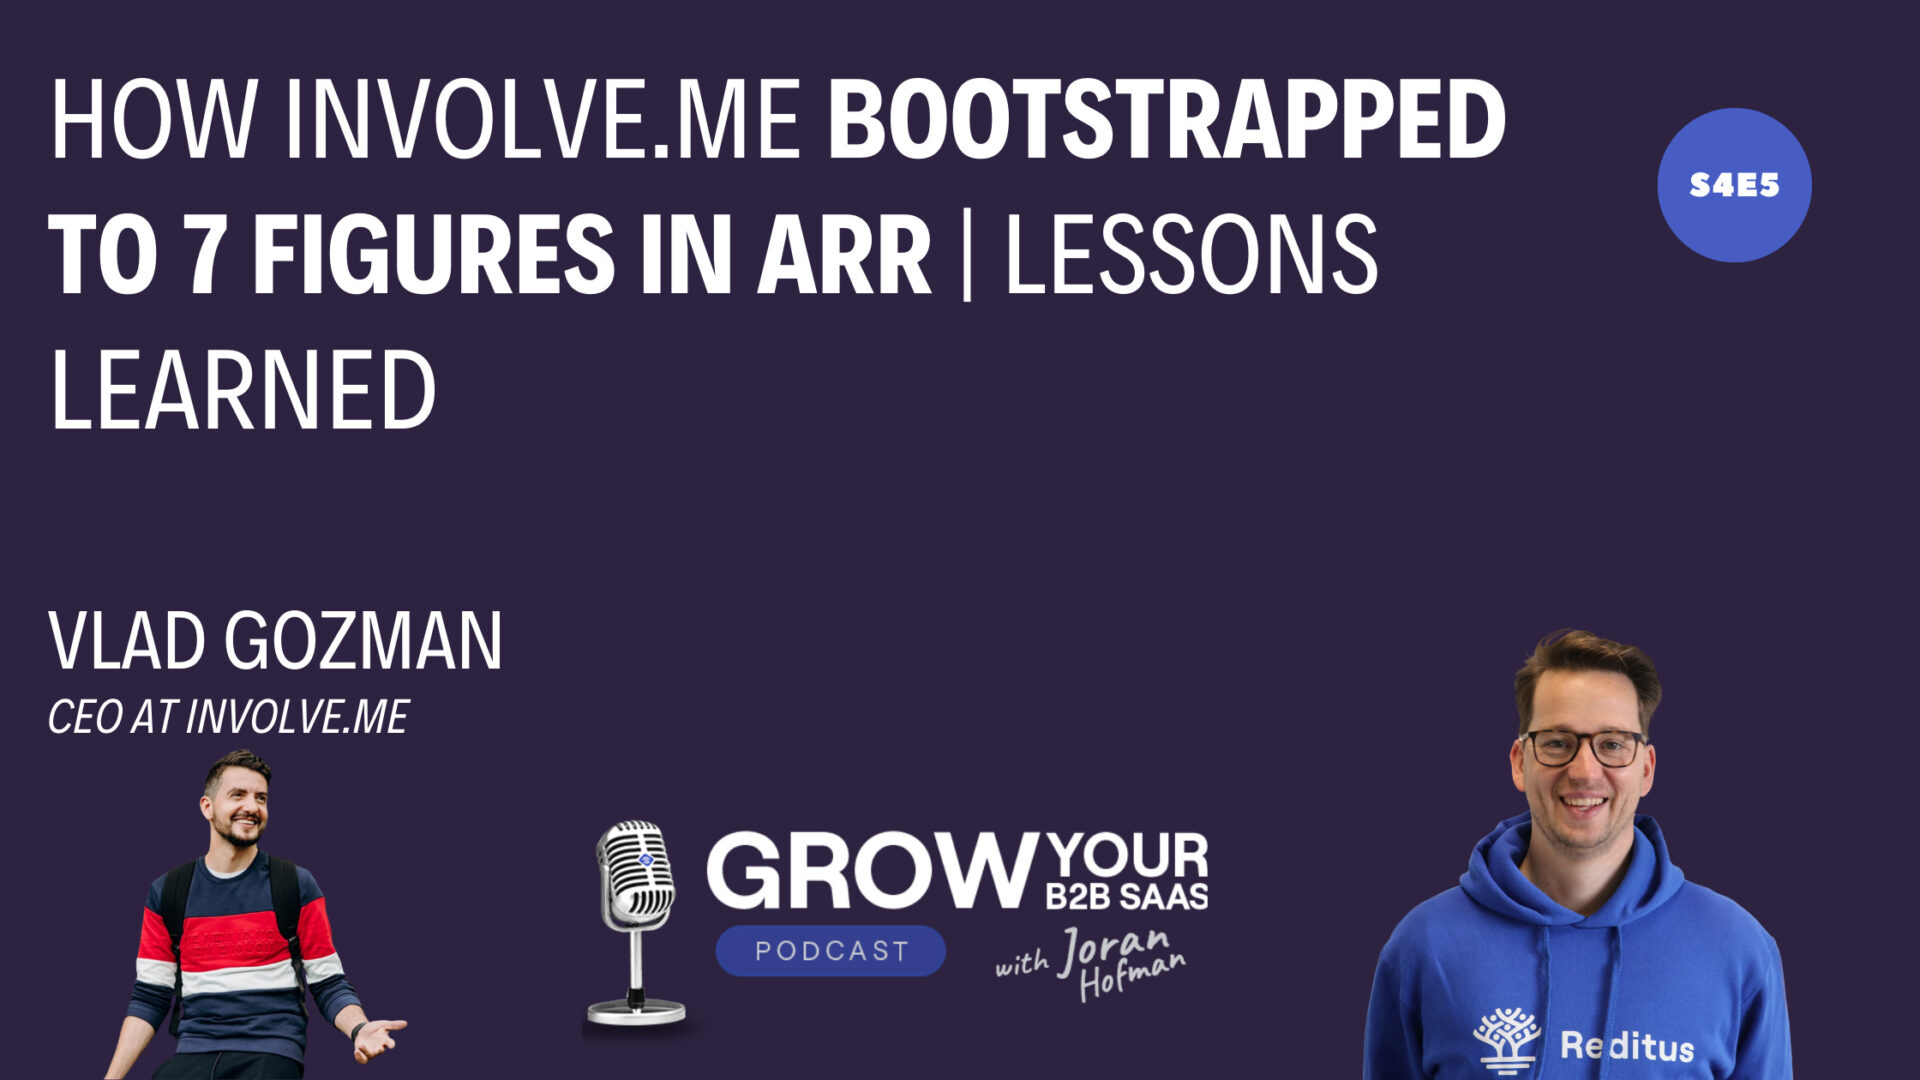 https://www.getreditus.com/podcast/s4e5-how-involve-me-bootstrapped-to-7-figures-in-arr-lessons-learned-with-vlad-gozman/